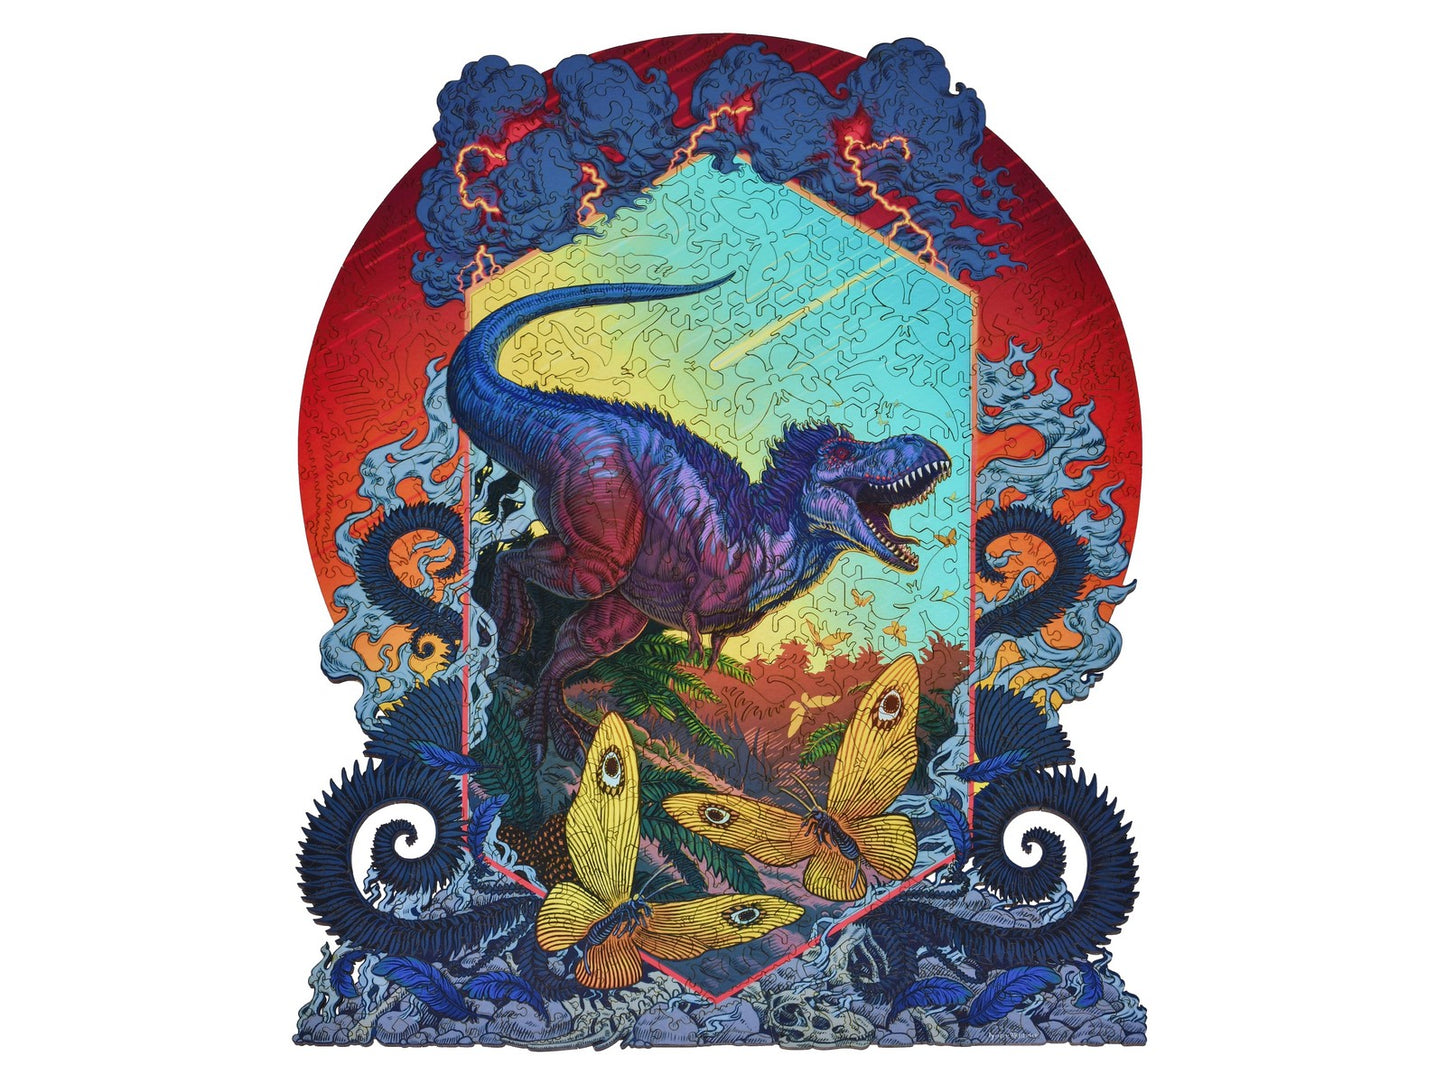 The front of the puzzle, Chasing Butterflies 66 Mya, showing a Tyrannosaurus Rex with an asteroid falling in the background.